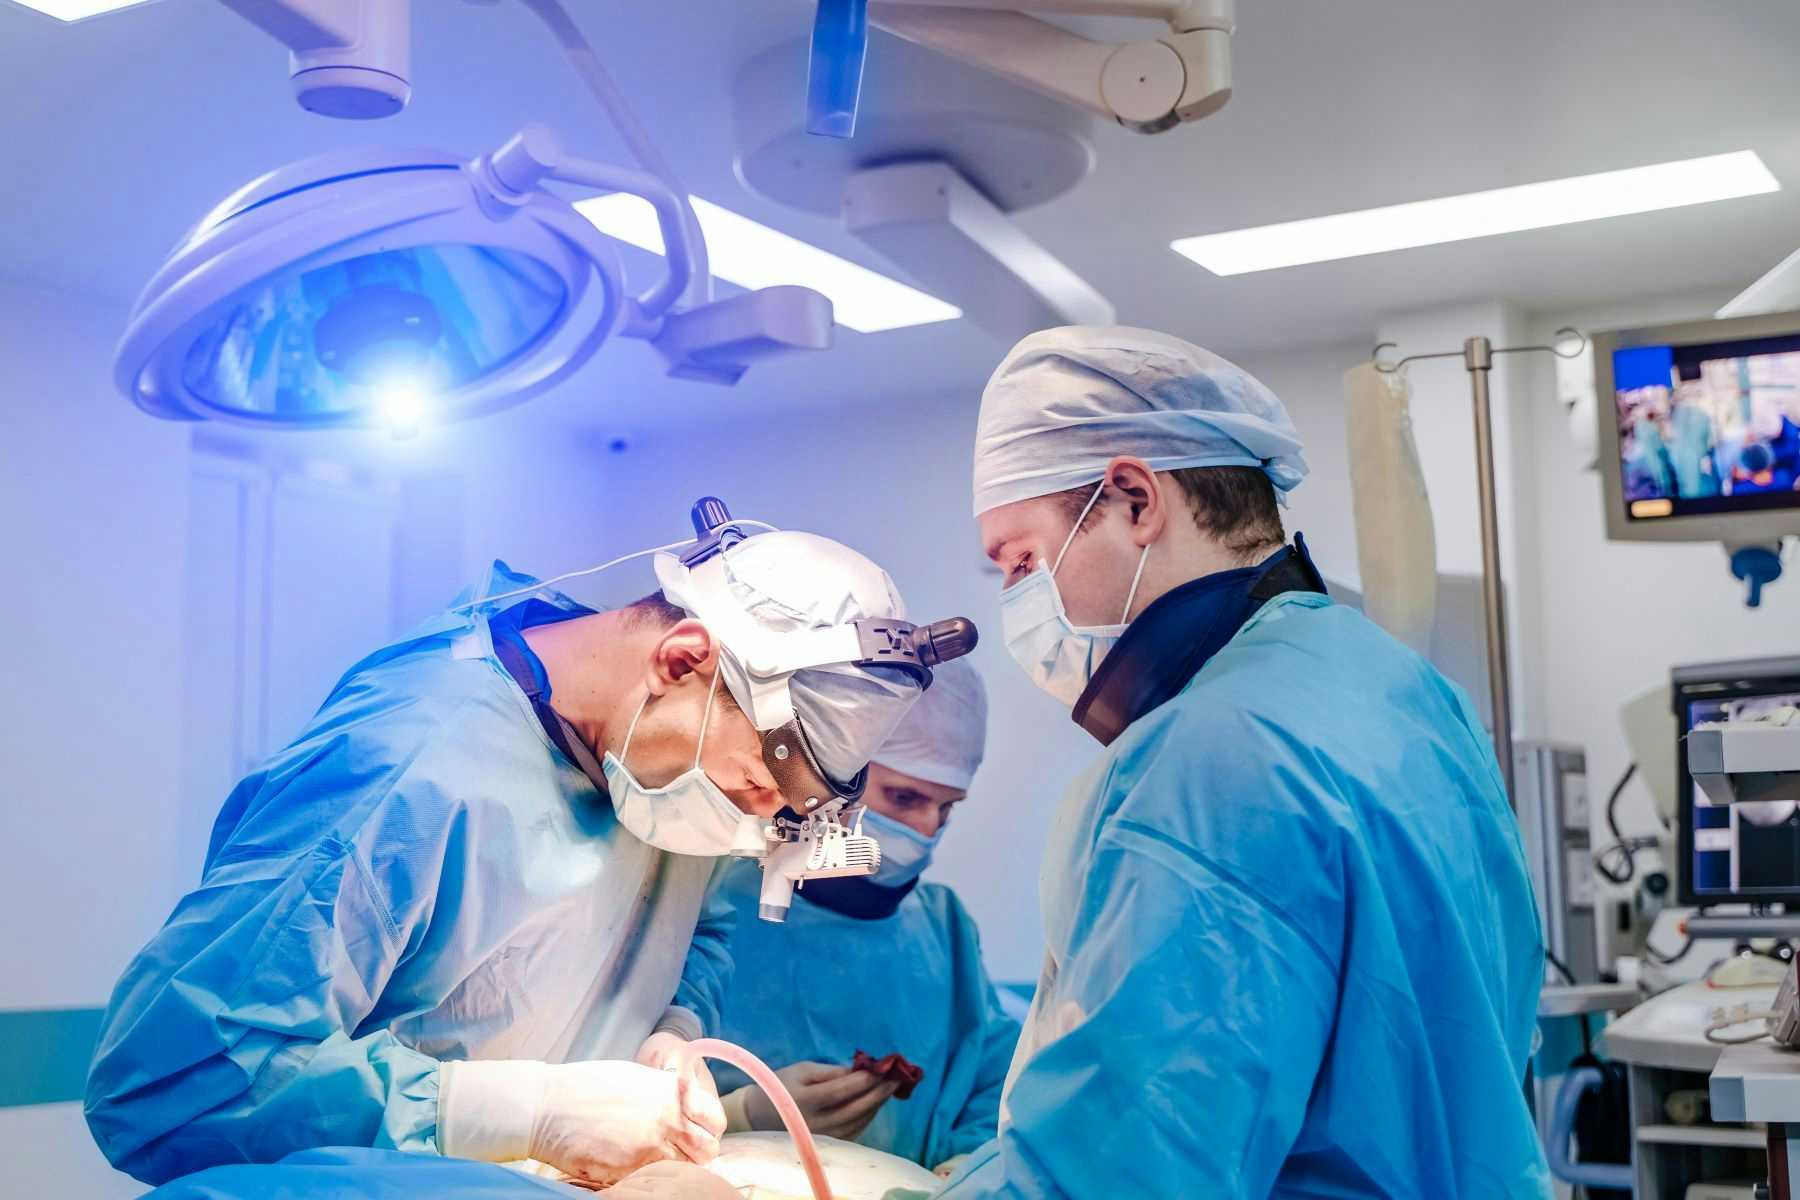 Spinal surgeons in operating room